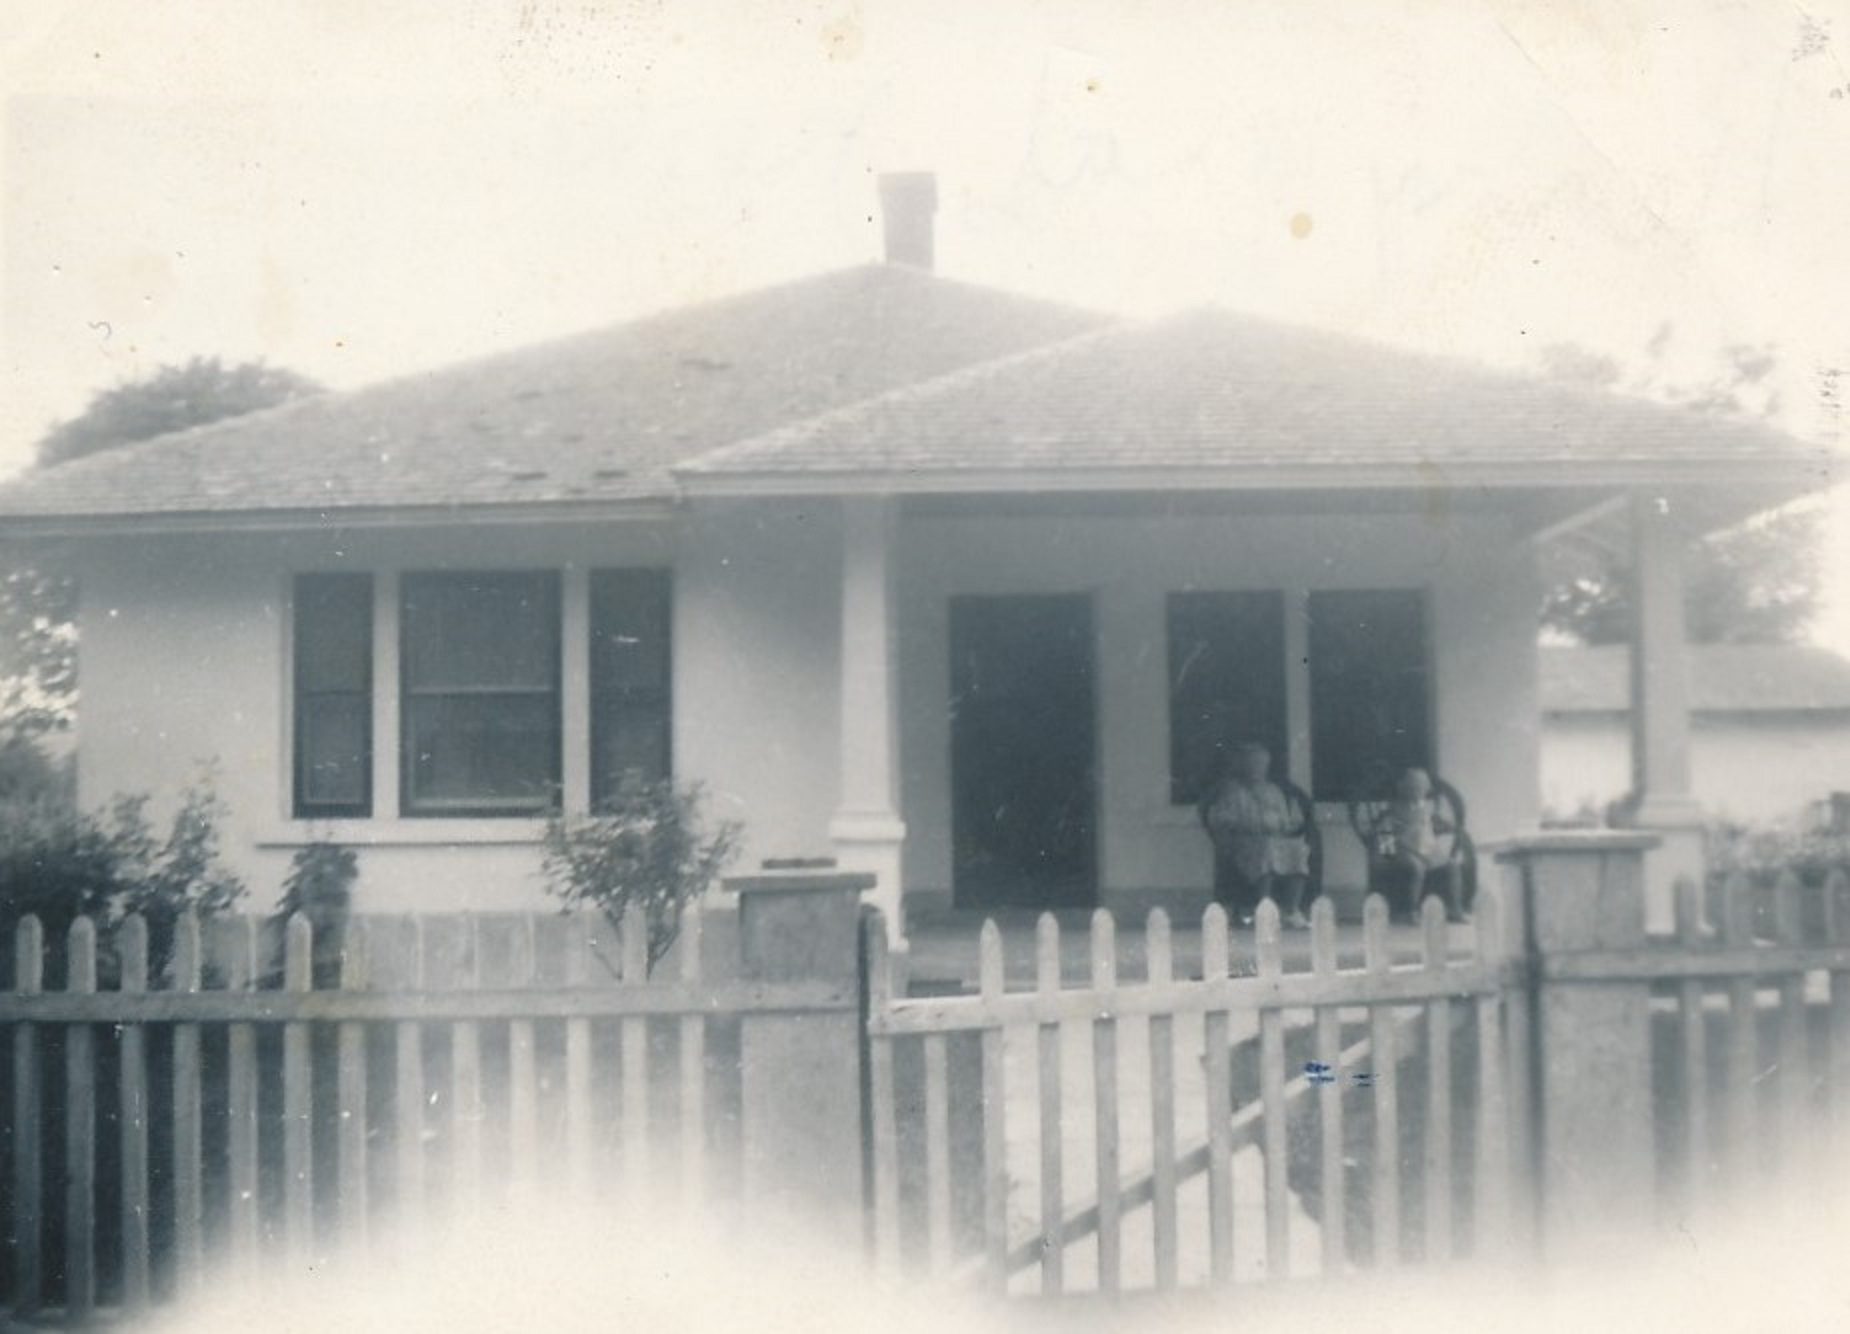 The Henry Graf Home in 1943